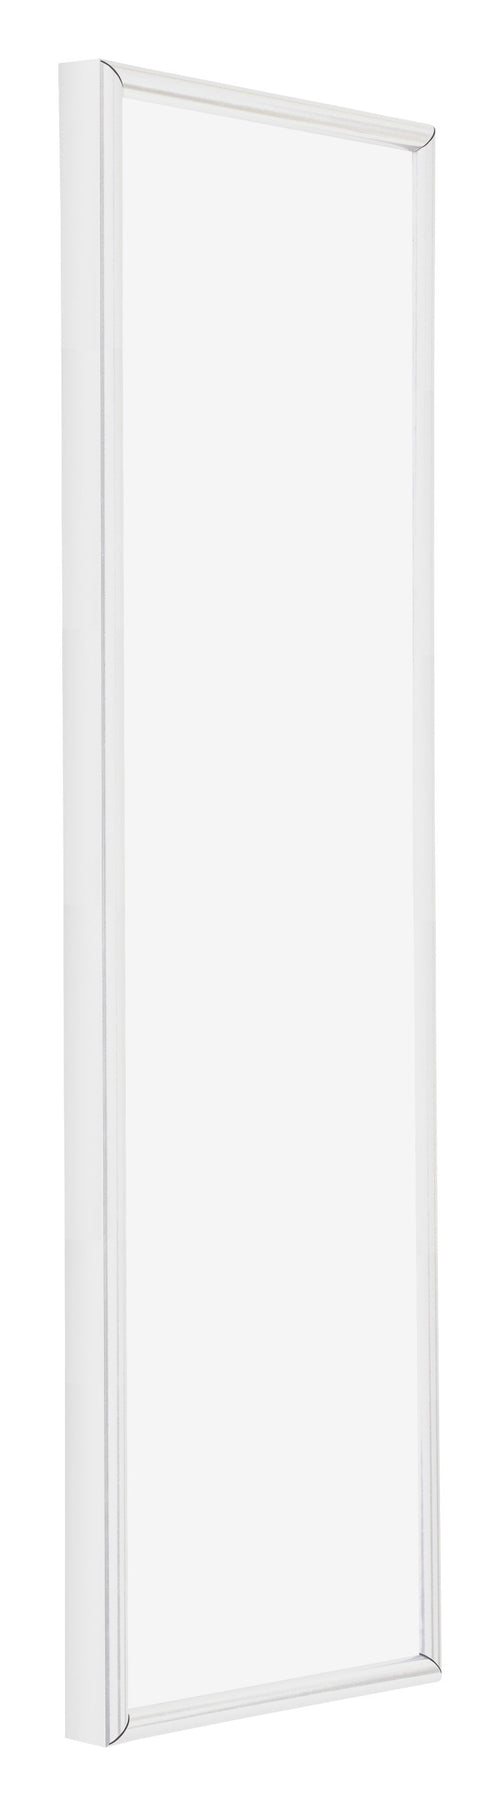 Annecy Plastic Photo Frame 33x98cm White High Gloss Front Oblique | Yourdecoration.com